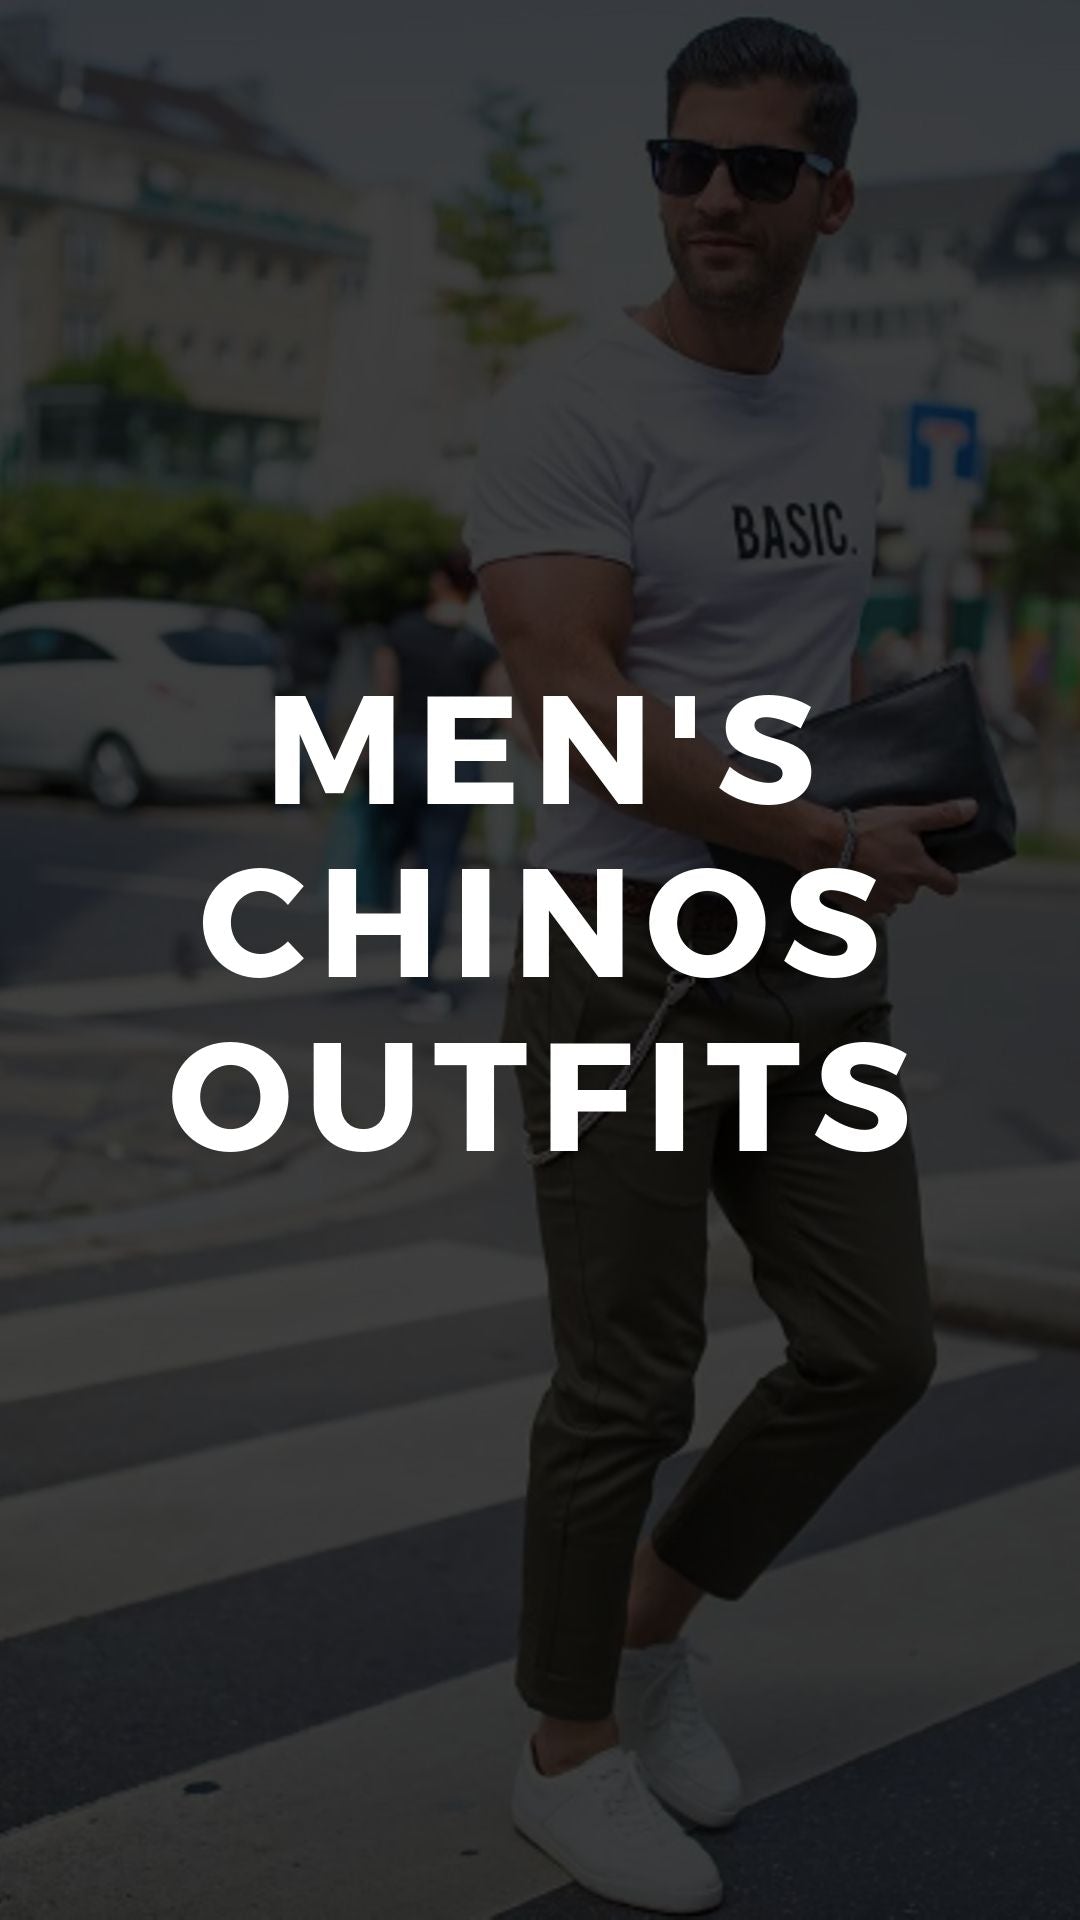 men's chinos outfits #casualstyle #mensfashion